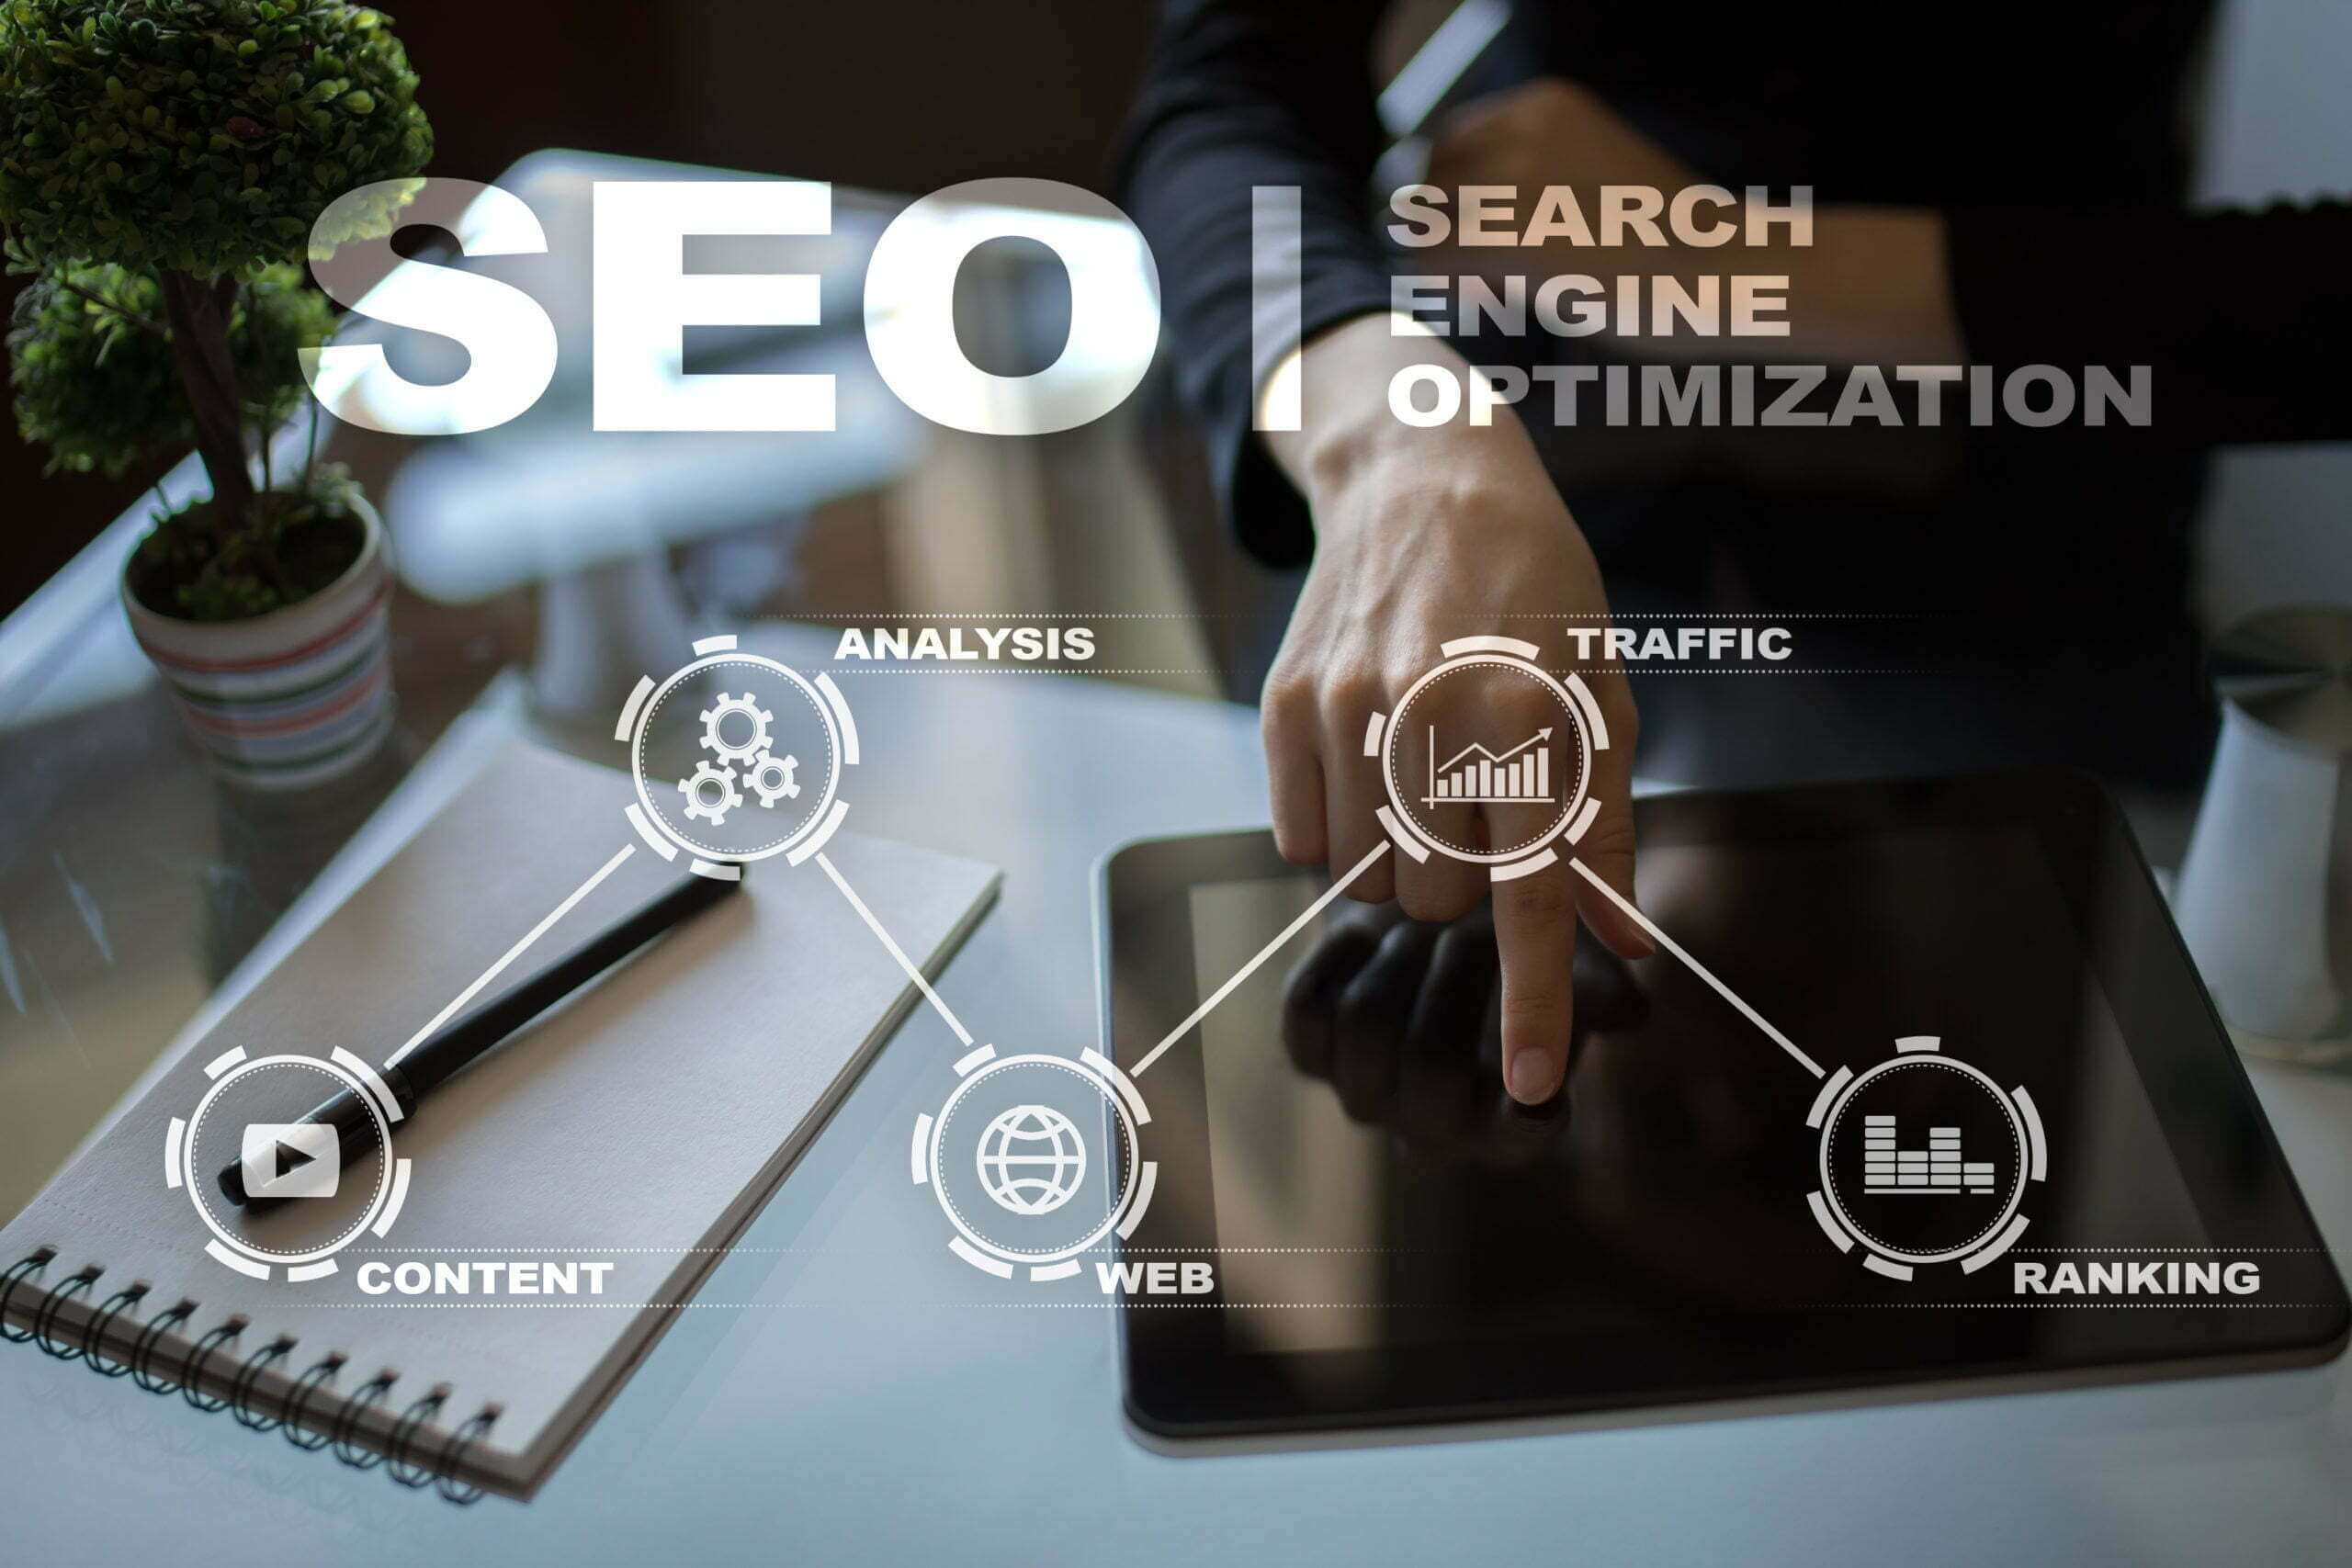 Why is Search Engine Optimization (SEO) so Important for Business?